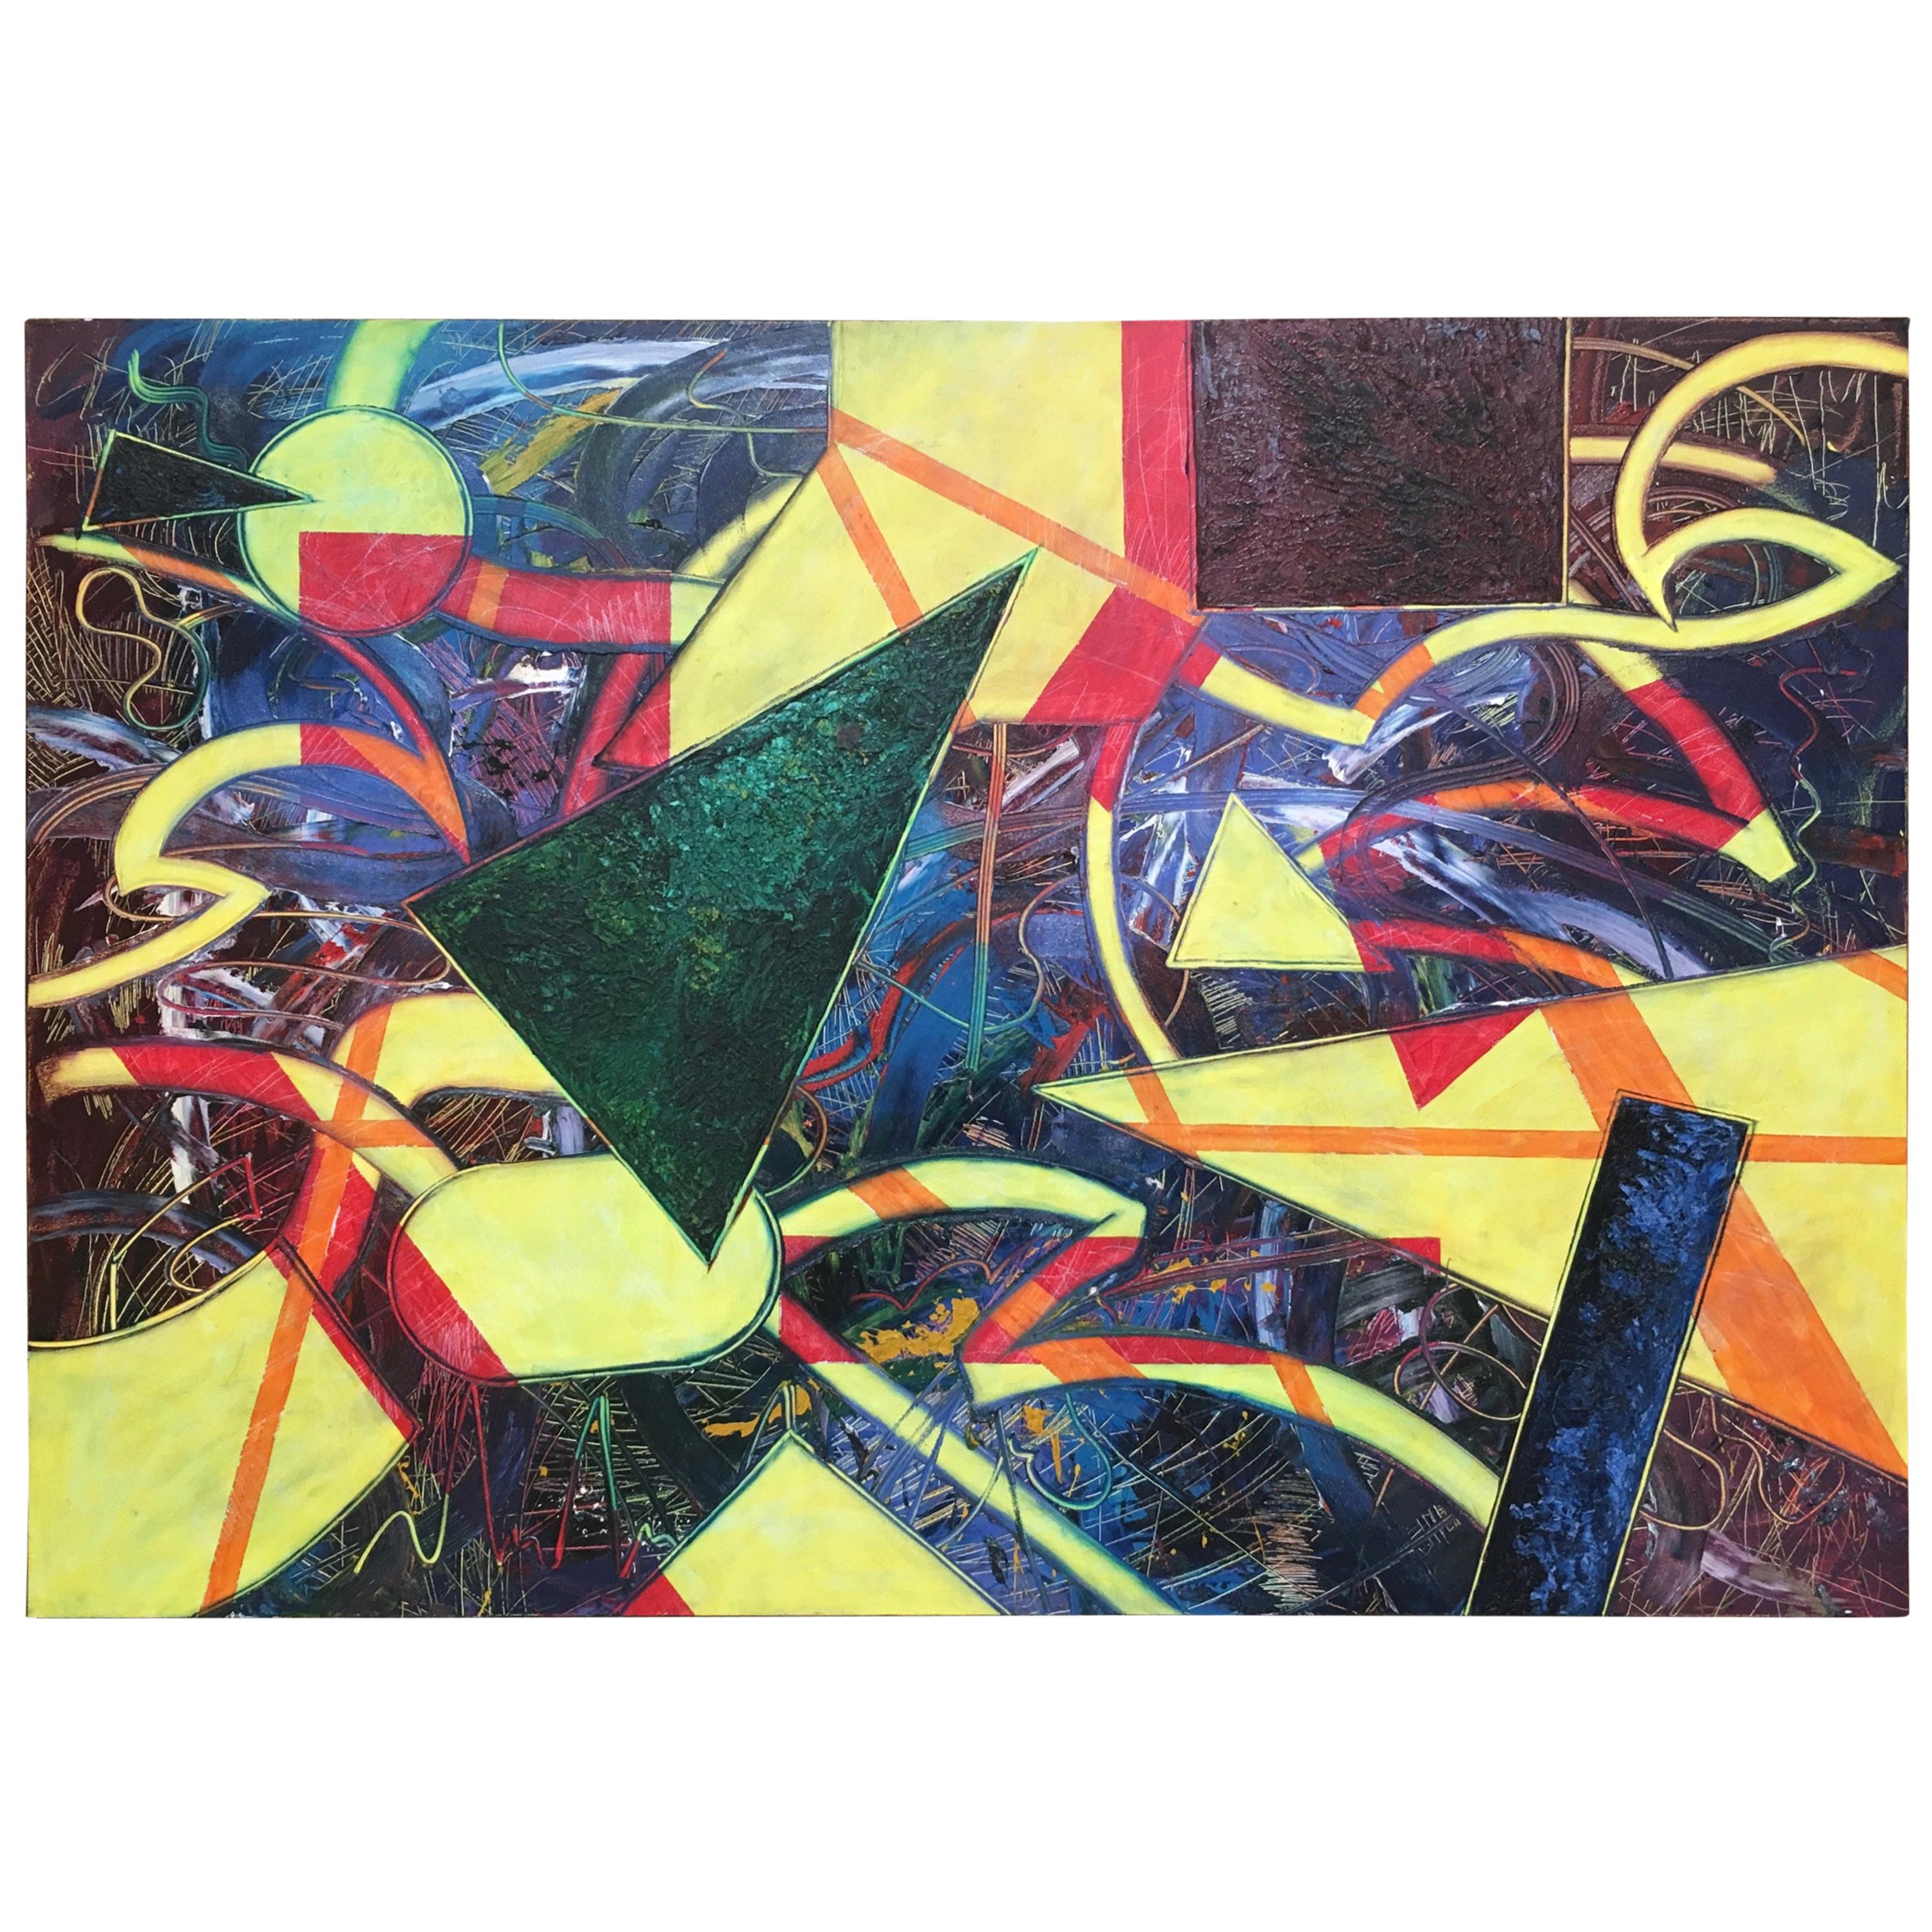 Massive Abstract Painting on Canvas Titled Neon Nightlife 